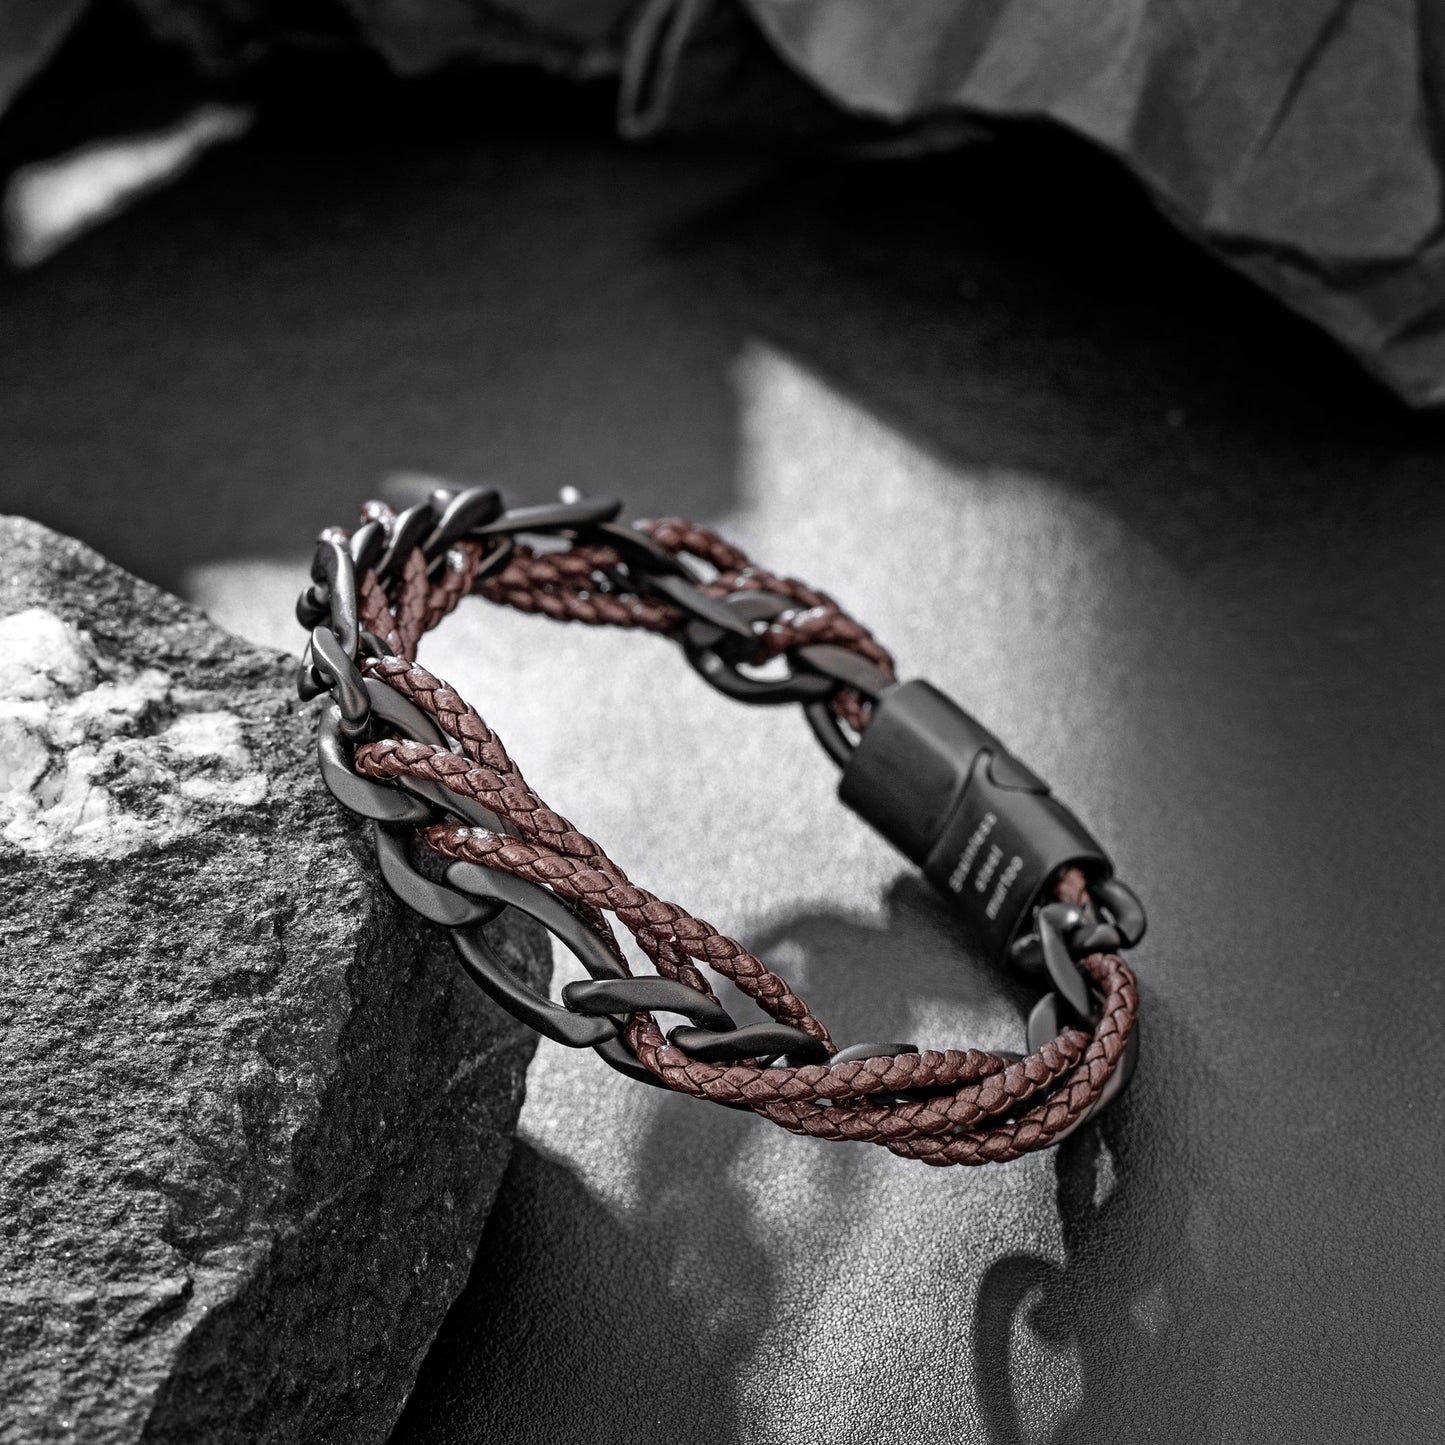 Leather and Steel Bracelet B00625